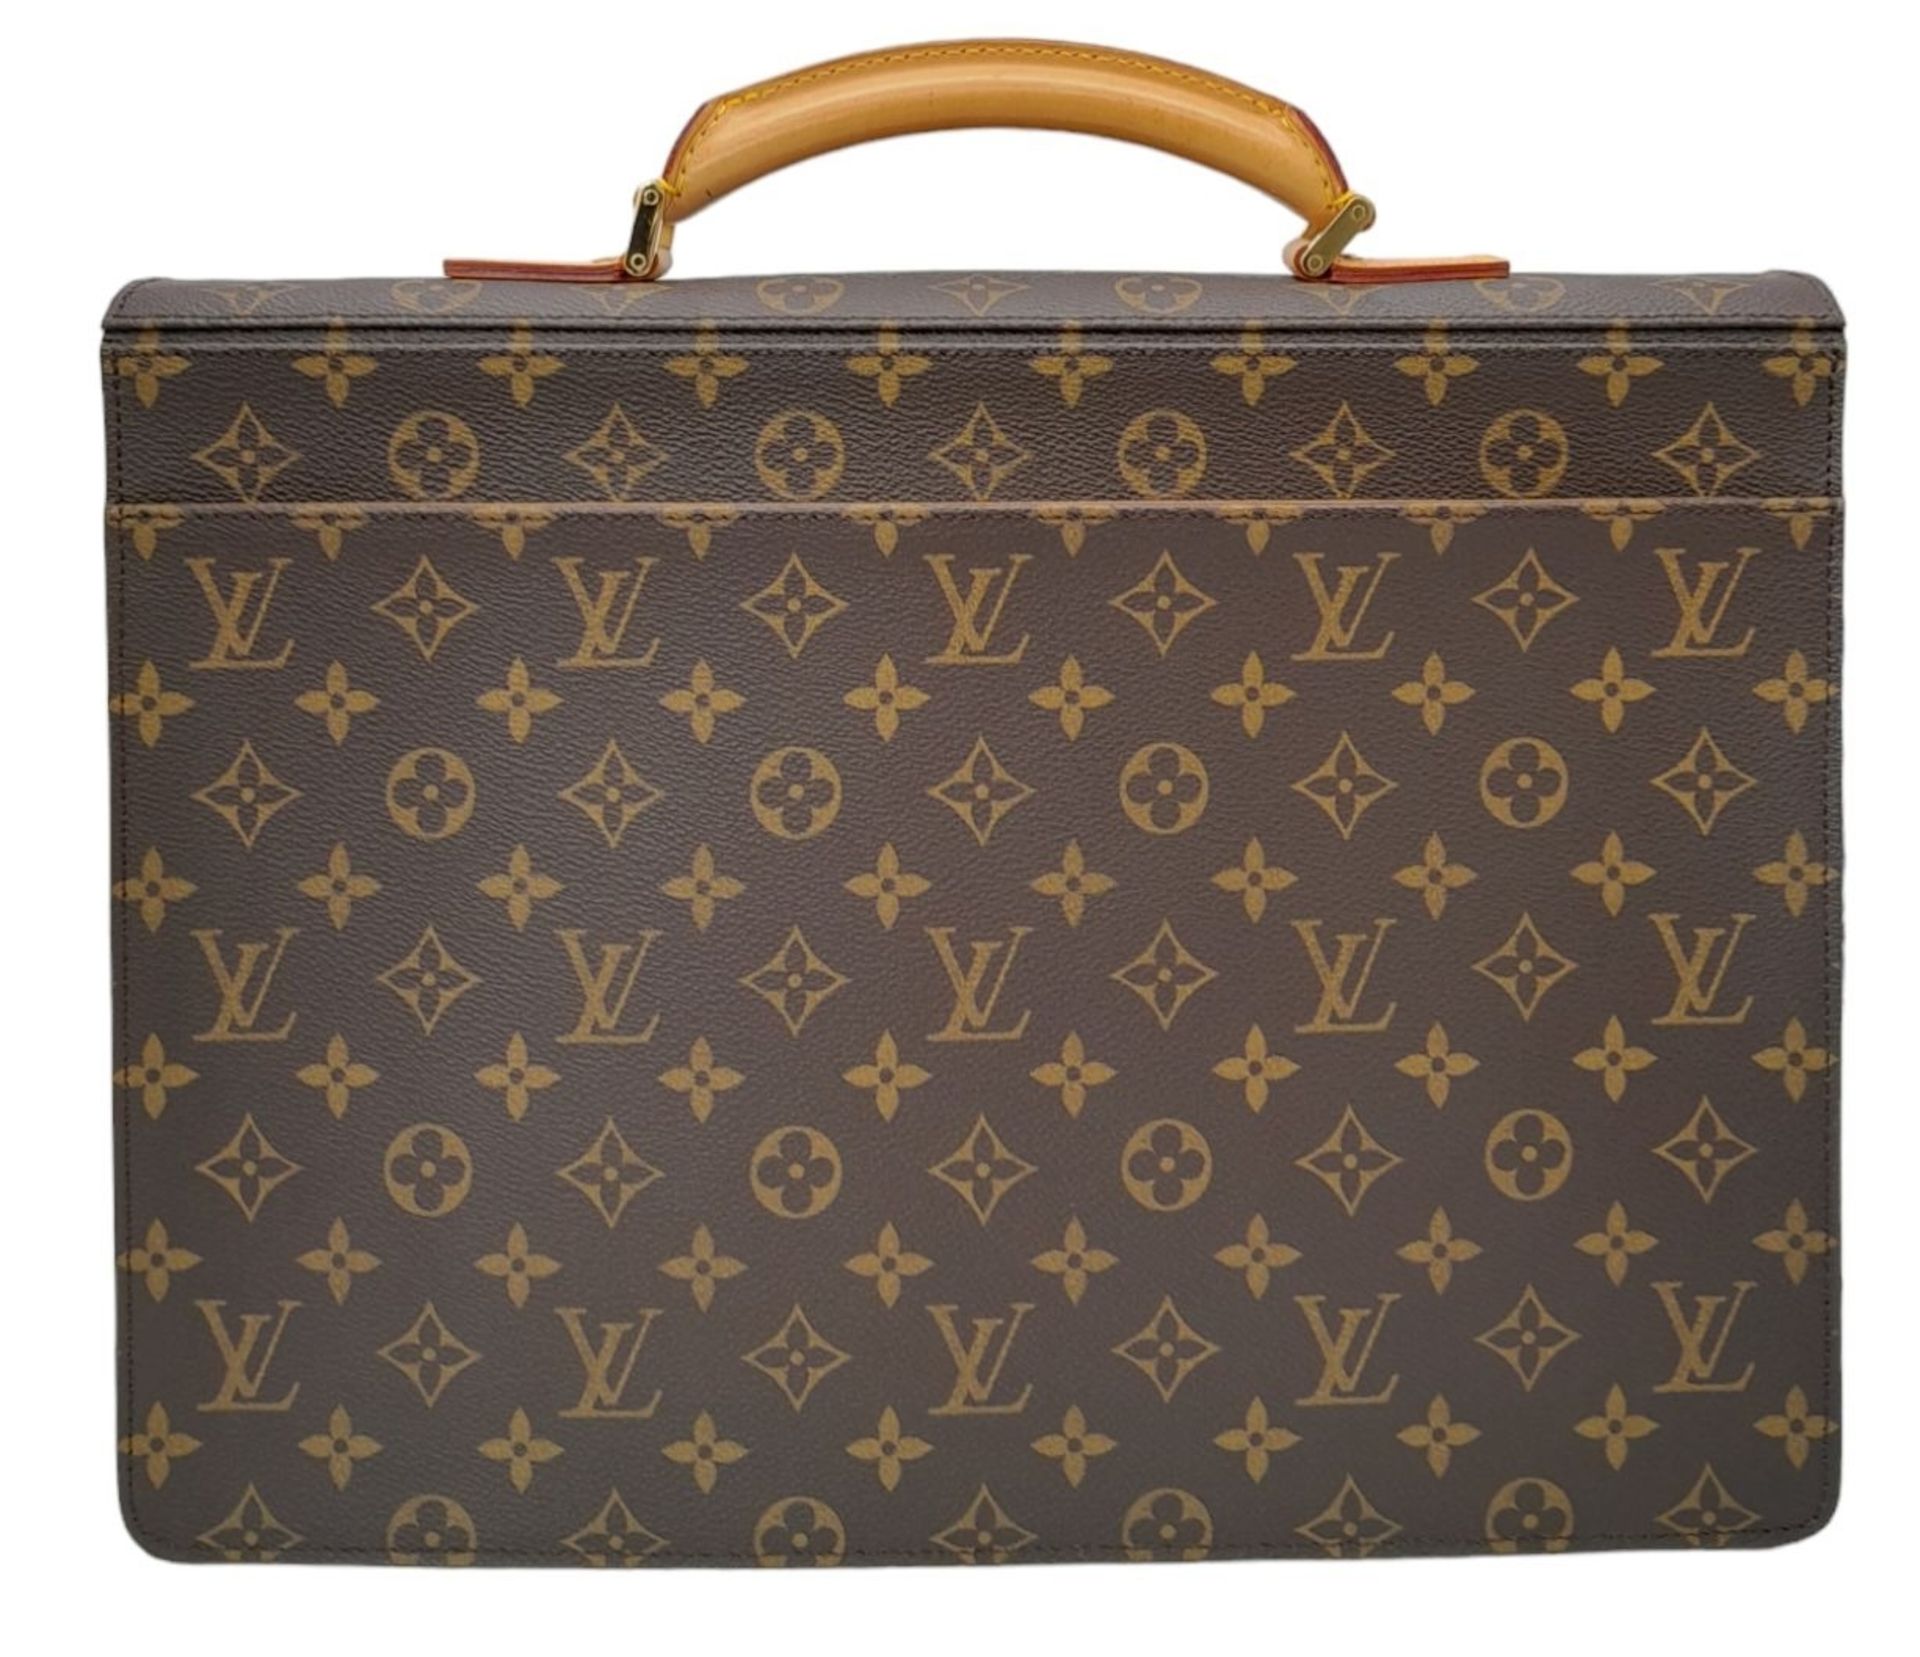 AN IMMACULATE LOUIS VUITTON CLASSIC BRIEF CASE IN UNUSED CONDITION WITH ORIGINAL DUST COVER . 38 X - Bild 2 aus 10